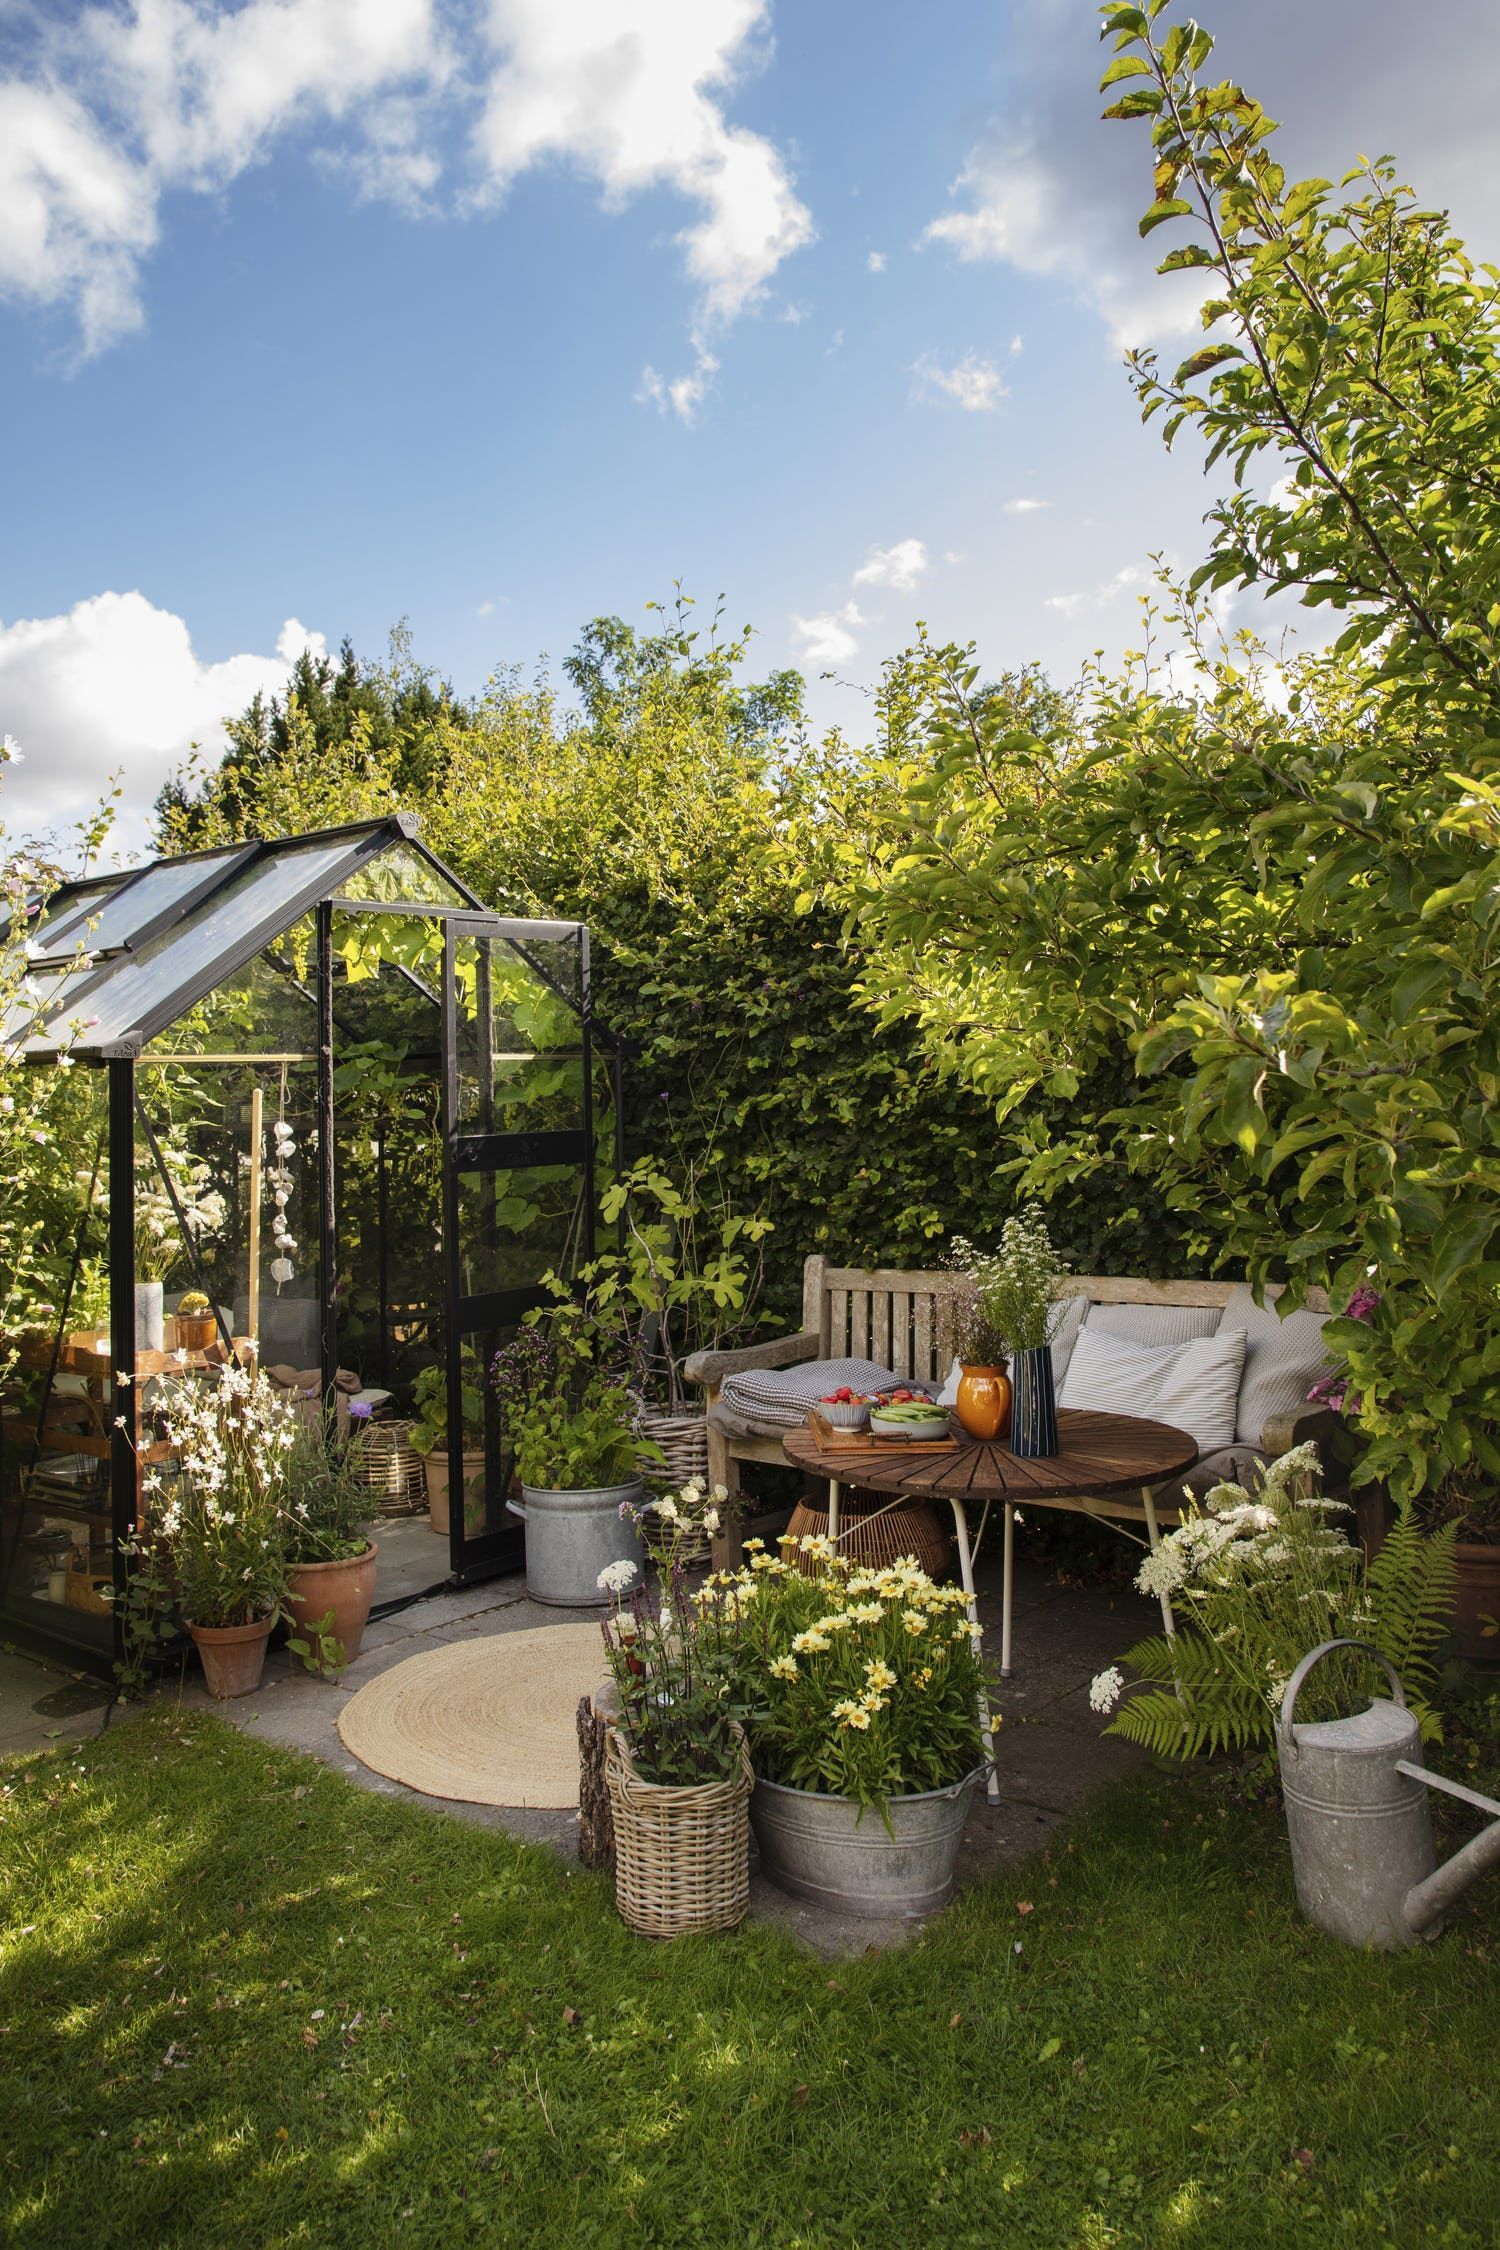 Beautiful English Garden Inspiration for a Tranquil Outdoor Oasis